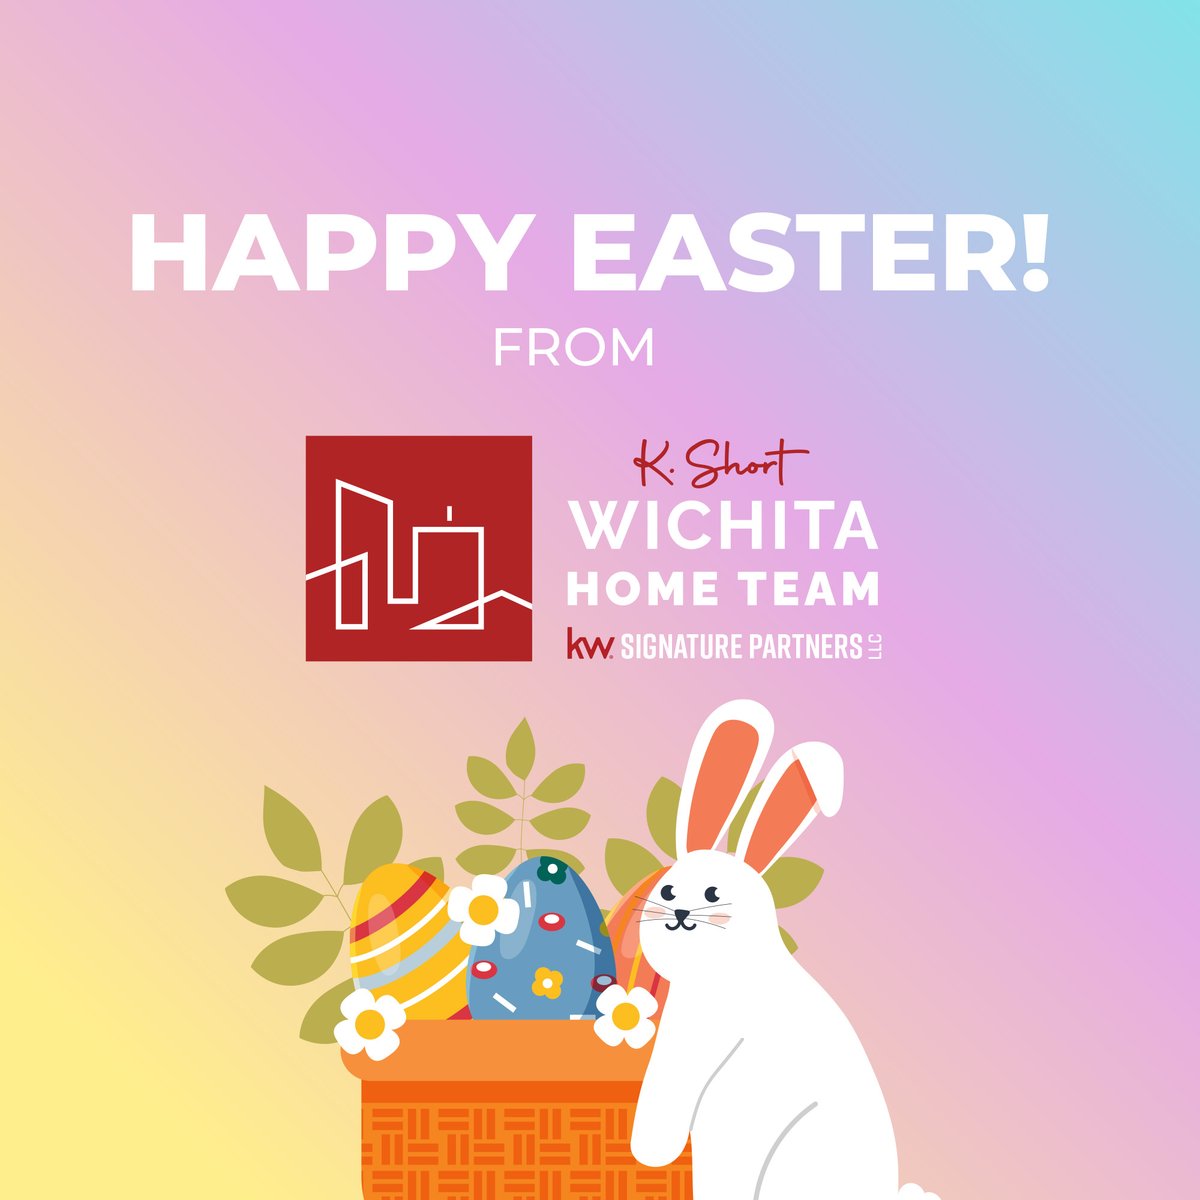 🐰🌷 Wishing everyone a joyful Easter from Kirk Short's Wichita Home Team at KW Signature Partners! May your day be filled with love, laughter, and cherished moments with family and friends. 🐣🌸 #HappyEaster #WichitaRealEstate

Wichita Home Team at KW Signature Partners, LLC.